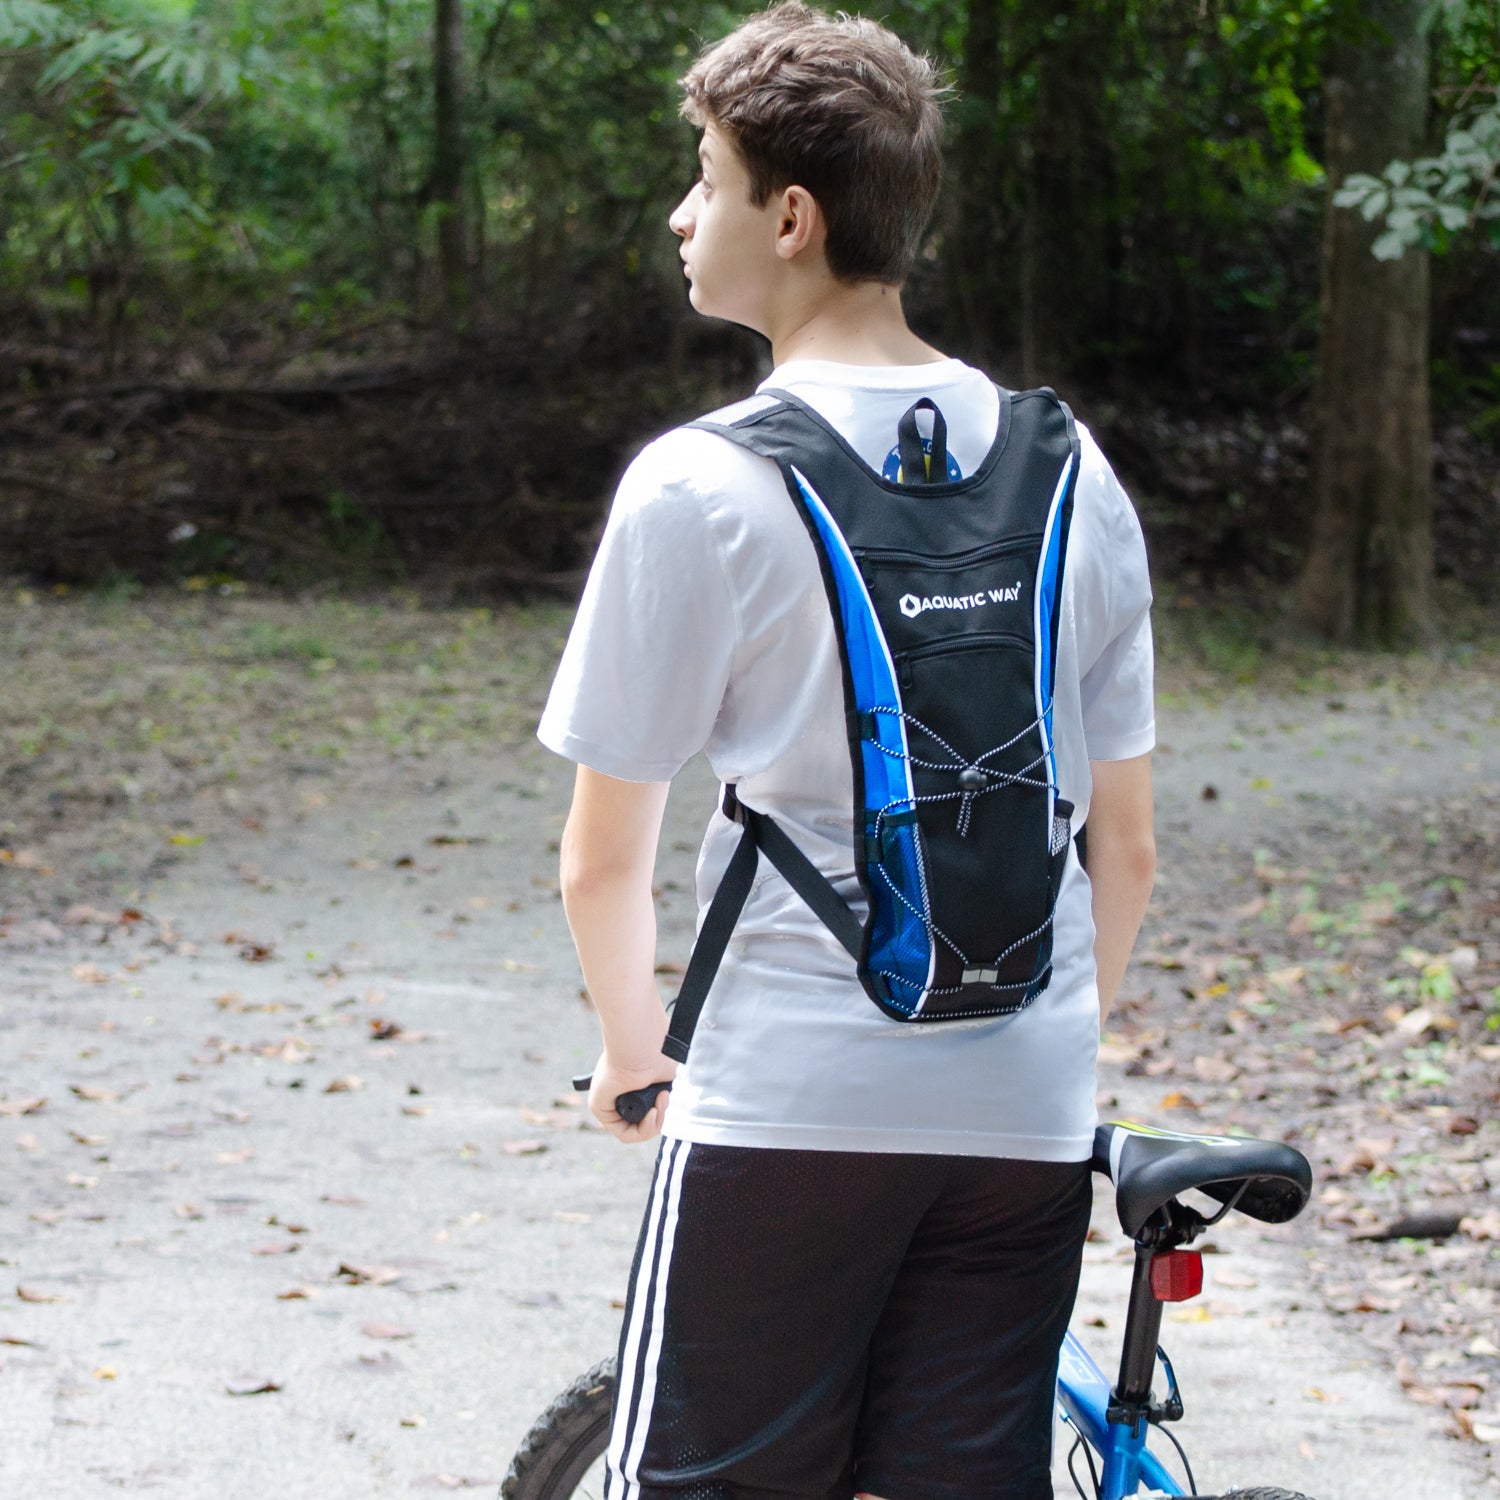 PVC Backpack Hydration Bladder 2L, Size: Small, Capacity: 2 Liter